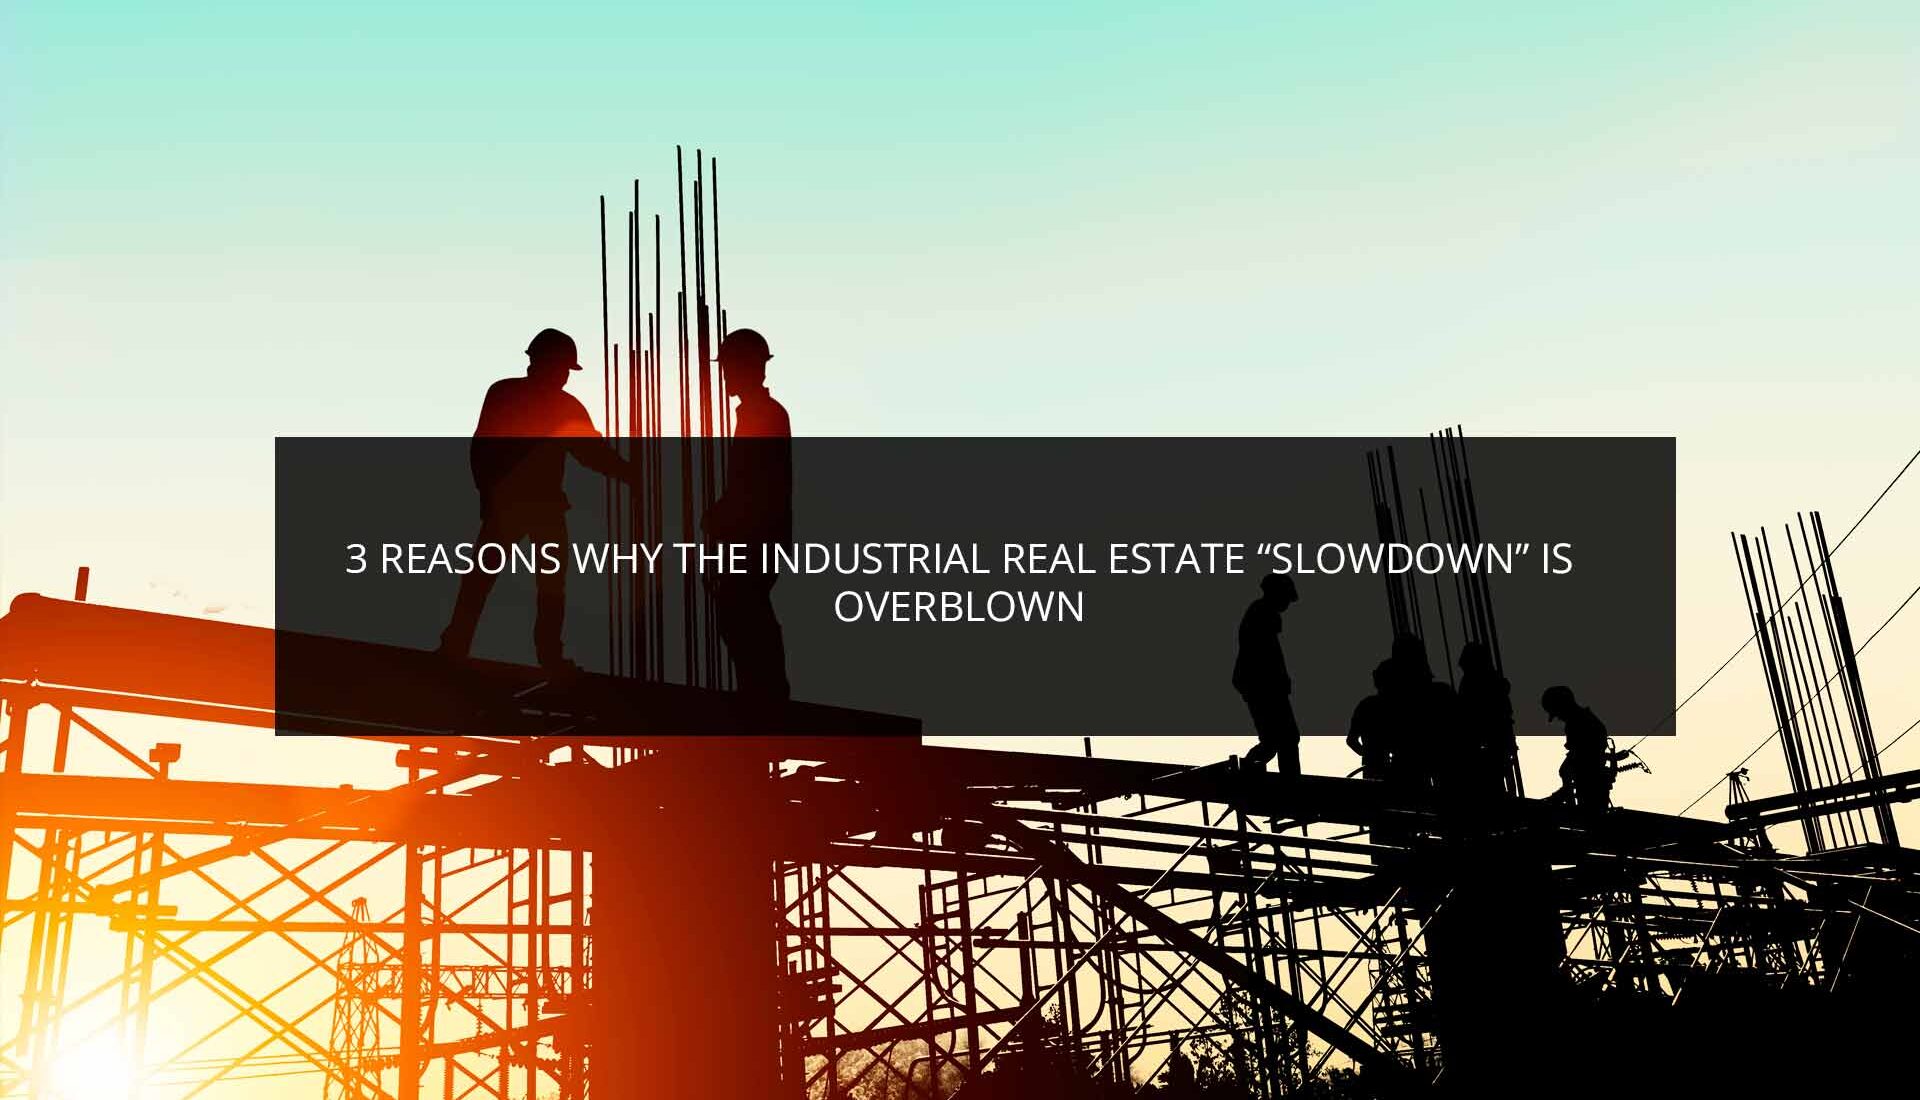 3 Reasons Why the Industrial Real Estate “Slowdown” Is Overblown